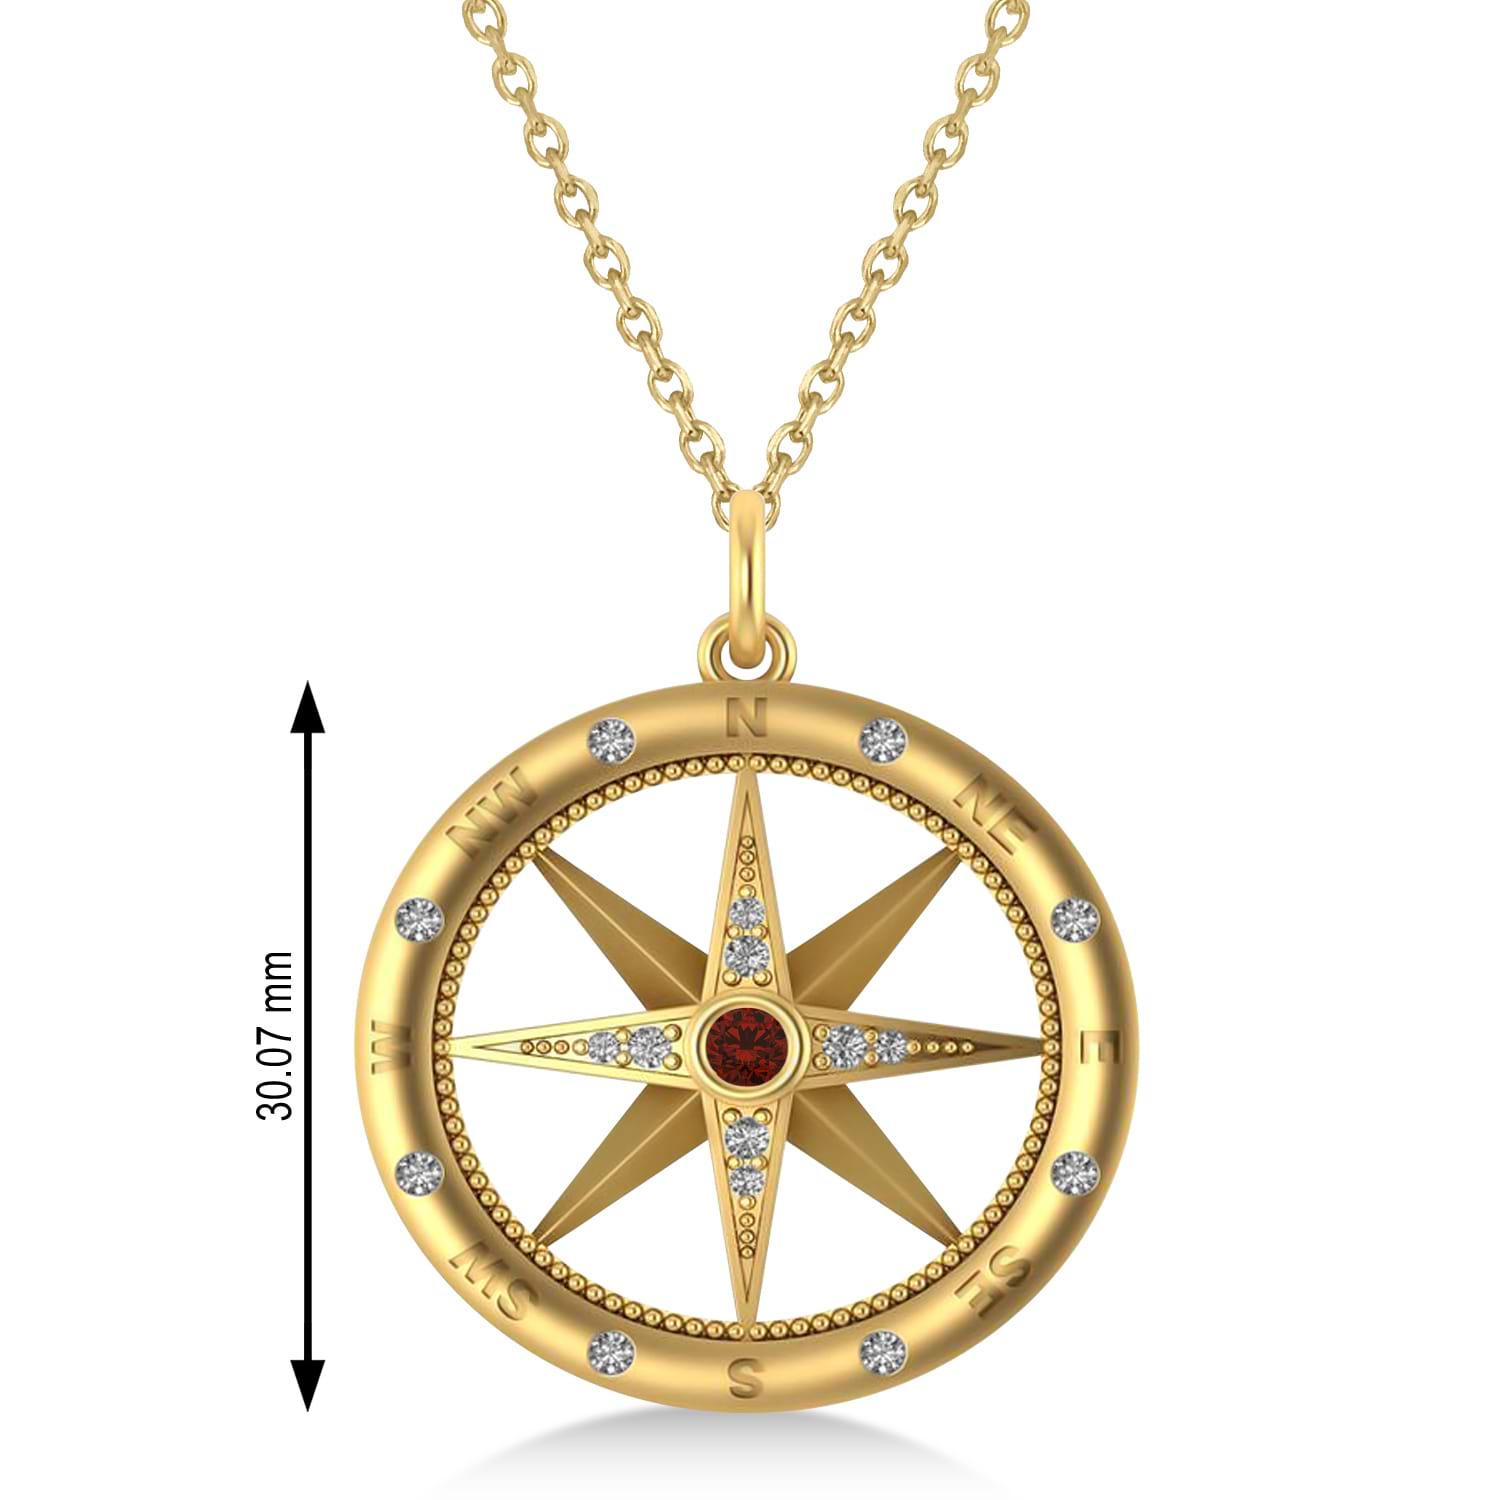 Large Compass Pendant For Men Garnet & Diamond Accented 14k Yellow Gold (0.38ct)